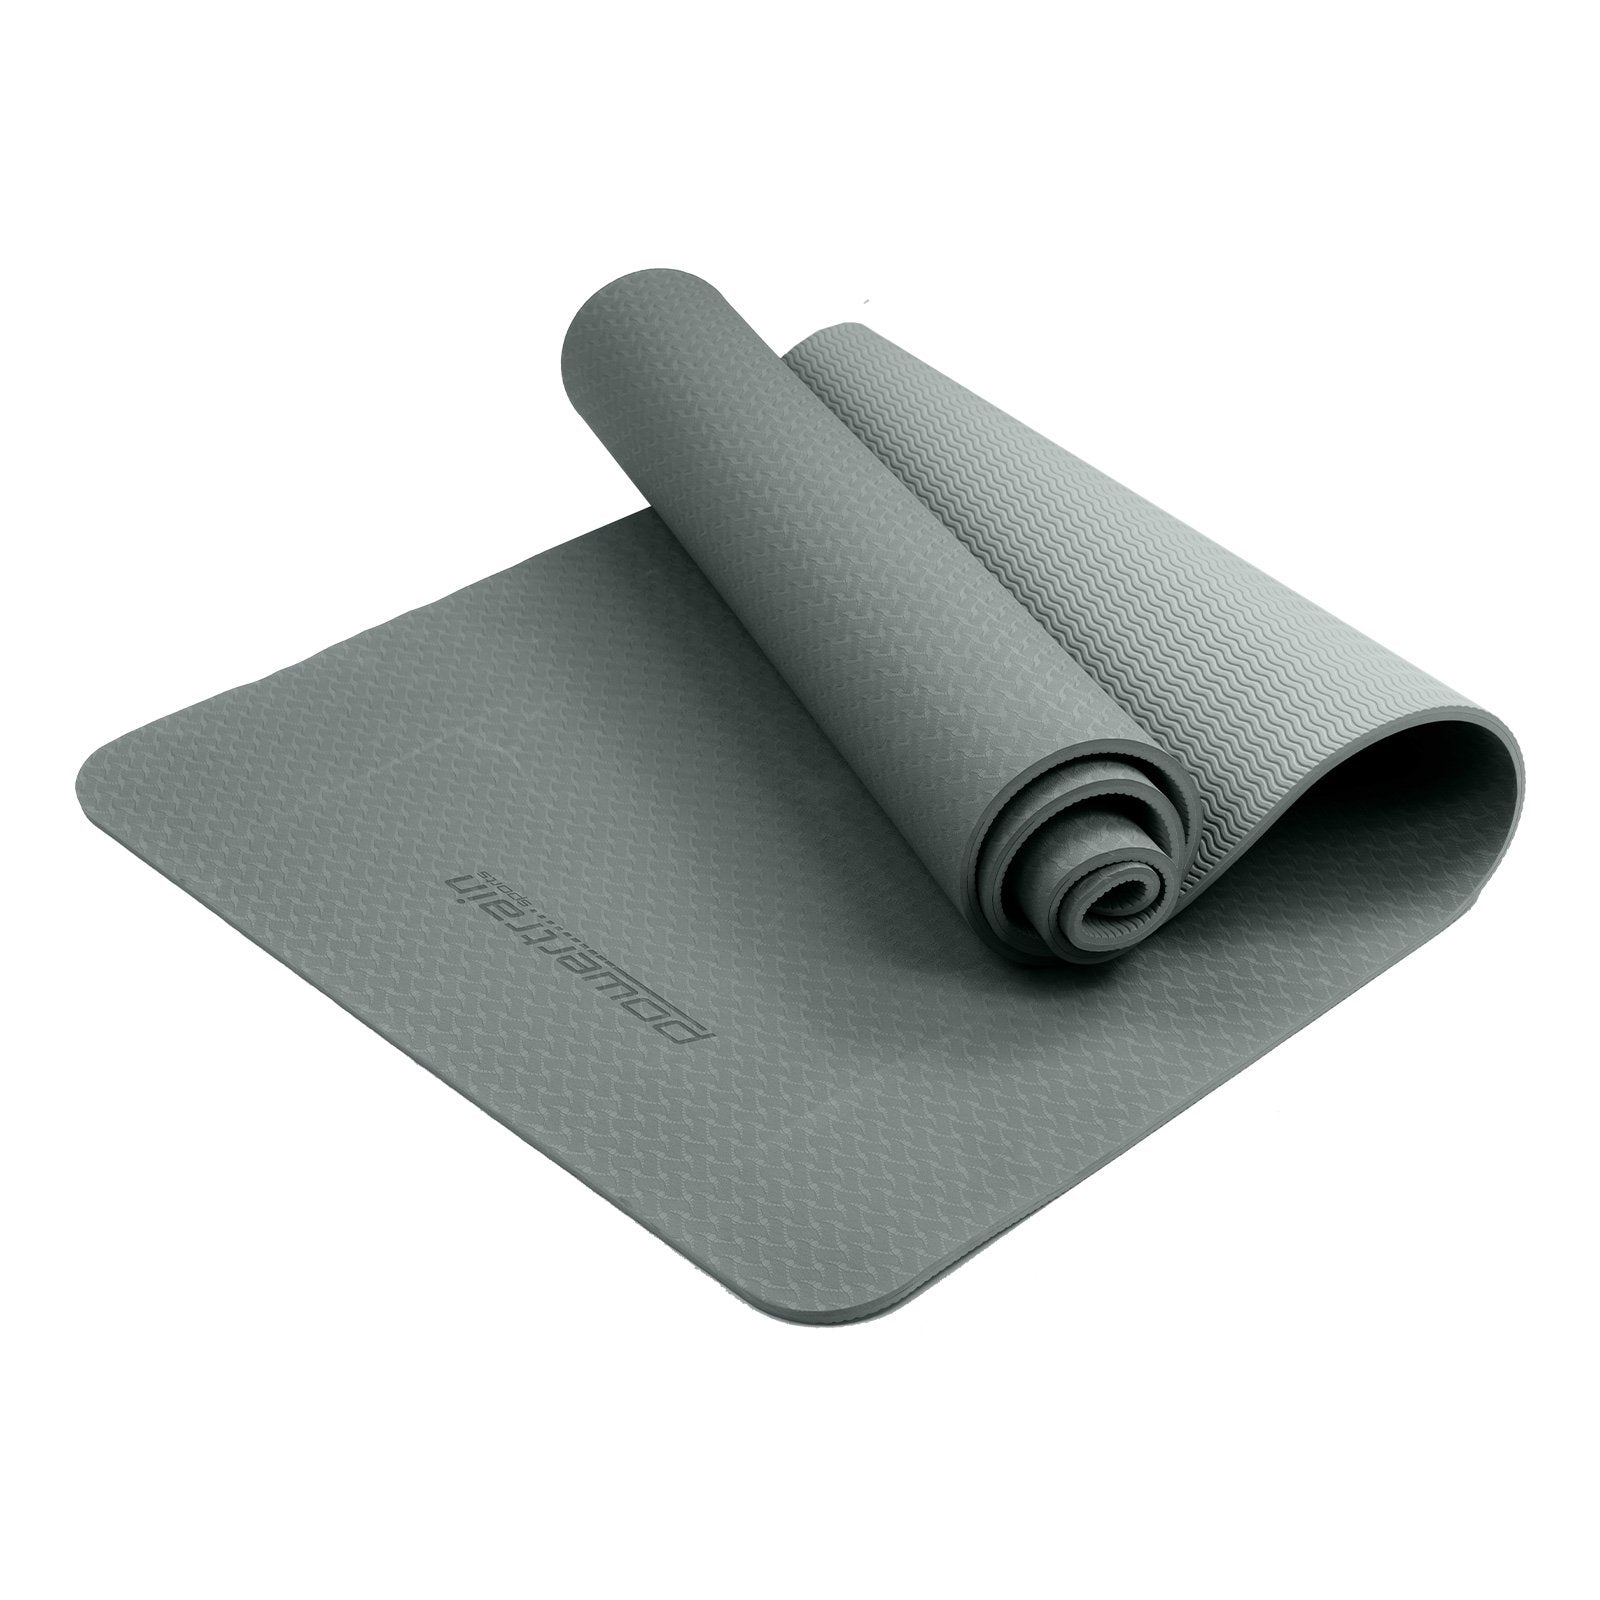 Eco-friendly Dual Layer 6mm Yoga Mat | Slate Grey | Non-slip Surface And Carry Strap For Ultimate Comfort And Portability